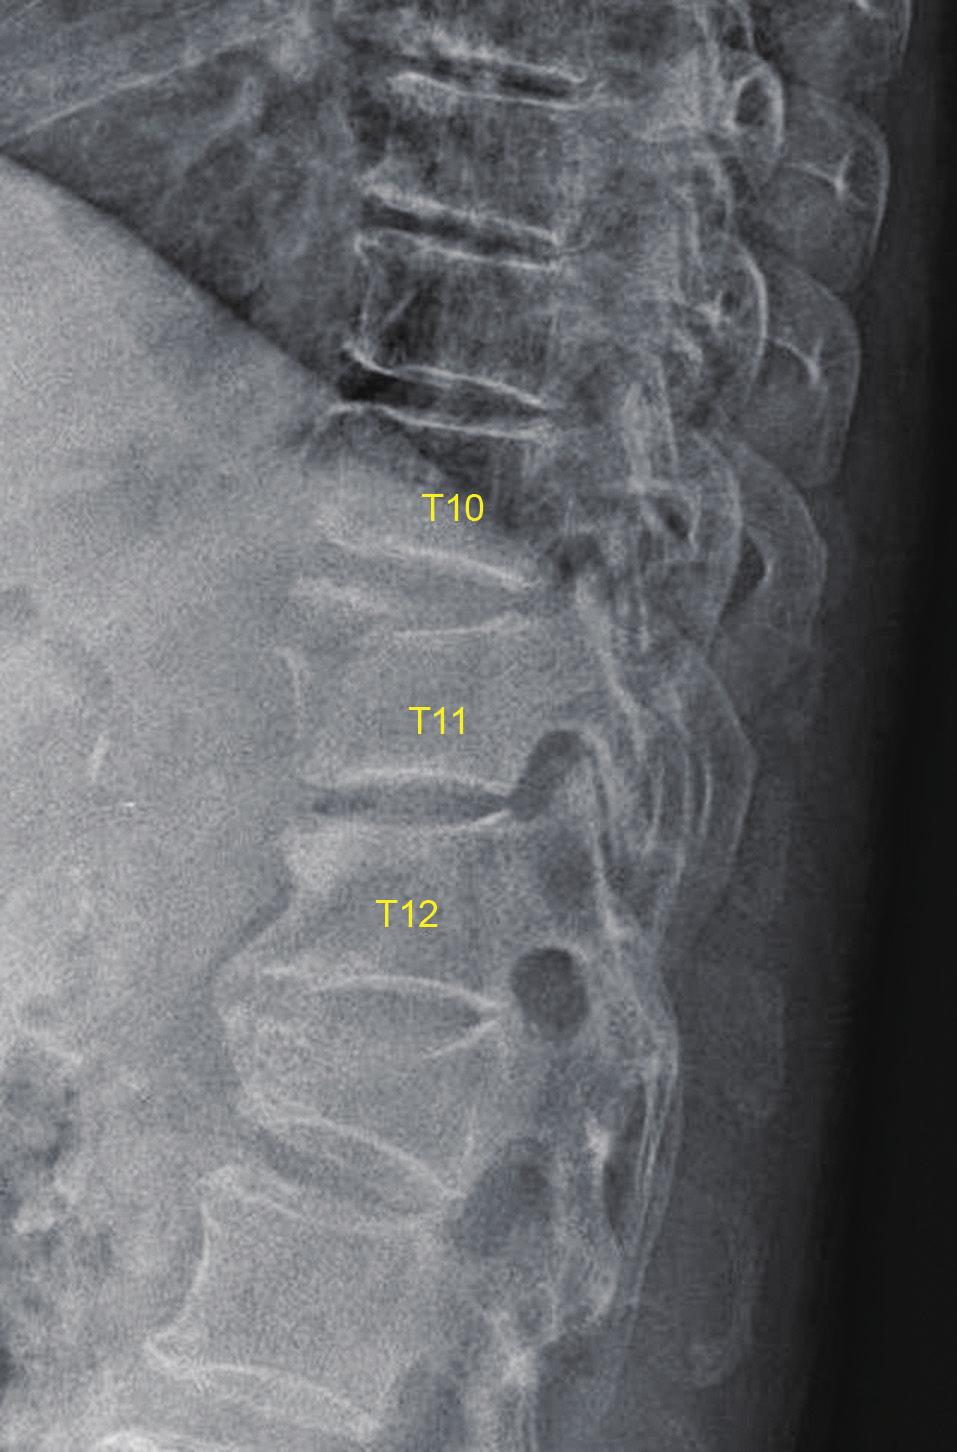 sian Spine Journal Hyperextension injury in thoracic spine 127 posterior column, which are spinous process fractures, magnetic resonance imaging (MRI) was required.